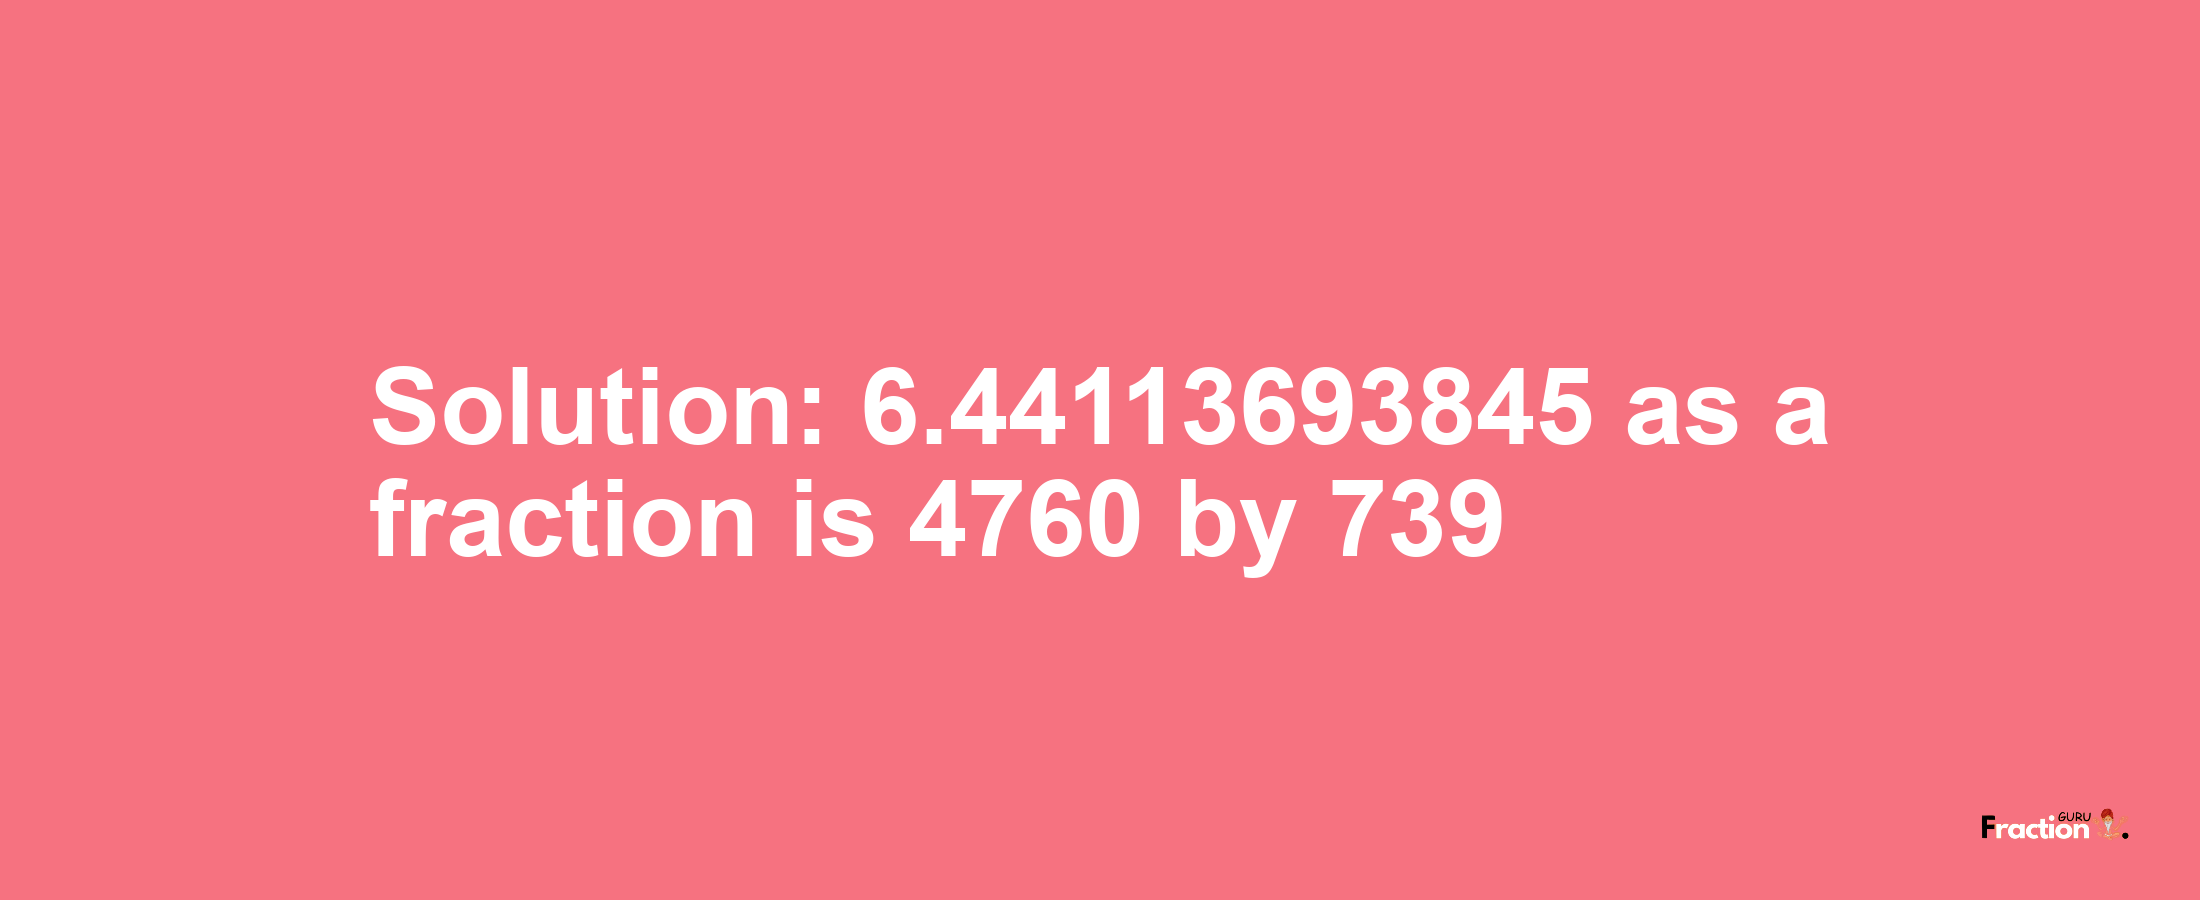 Solution:6.44113693845 as a fraction is 4760/739